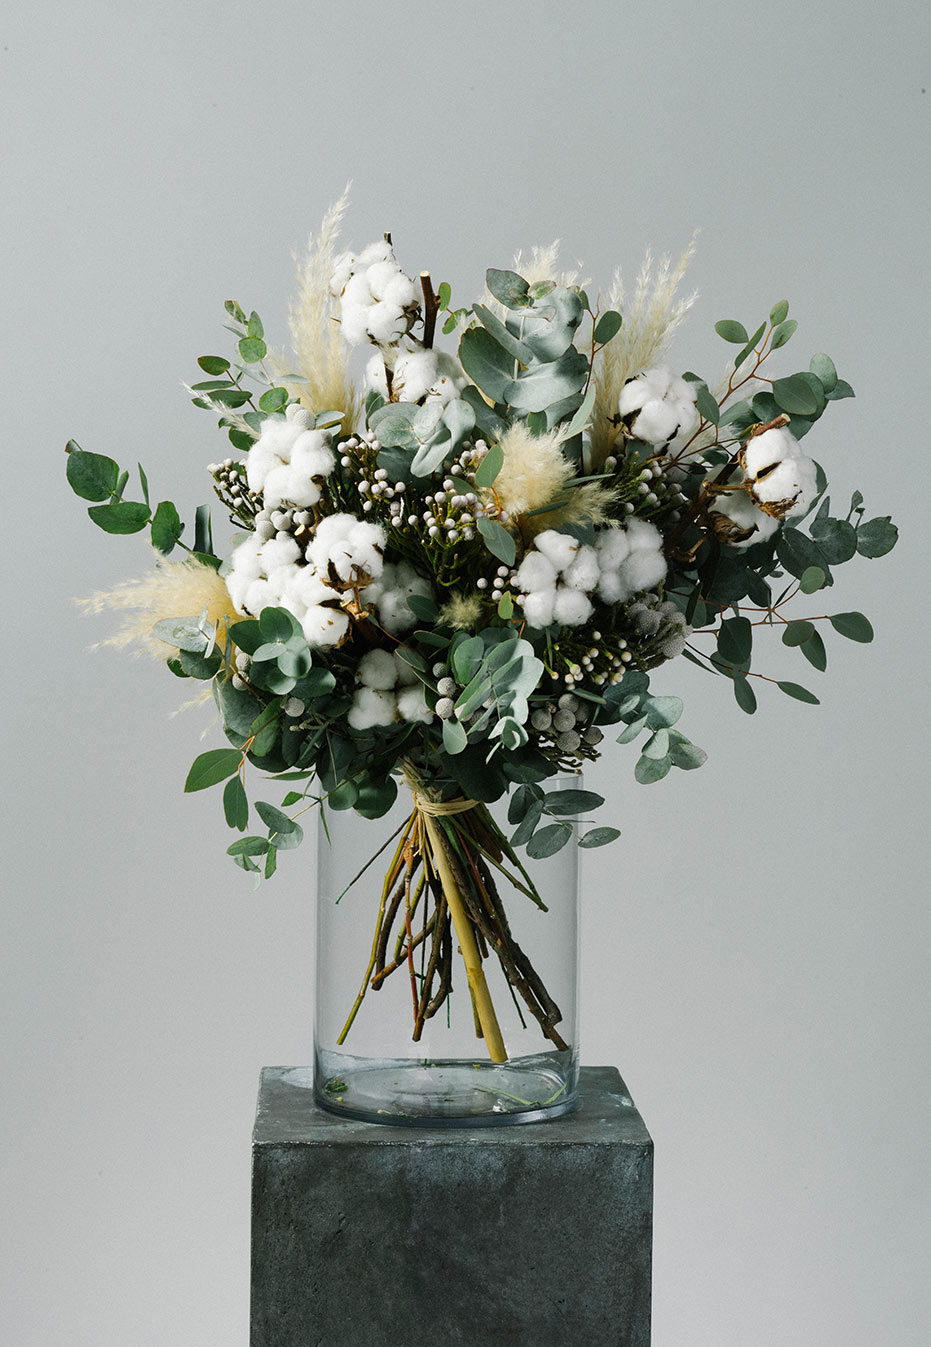 flower bouquet of cotton and miscanthus by flannel flowers